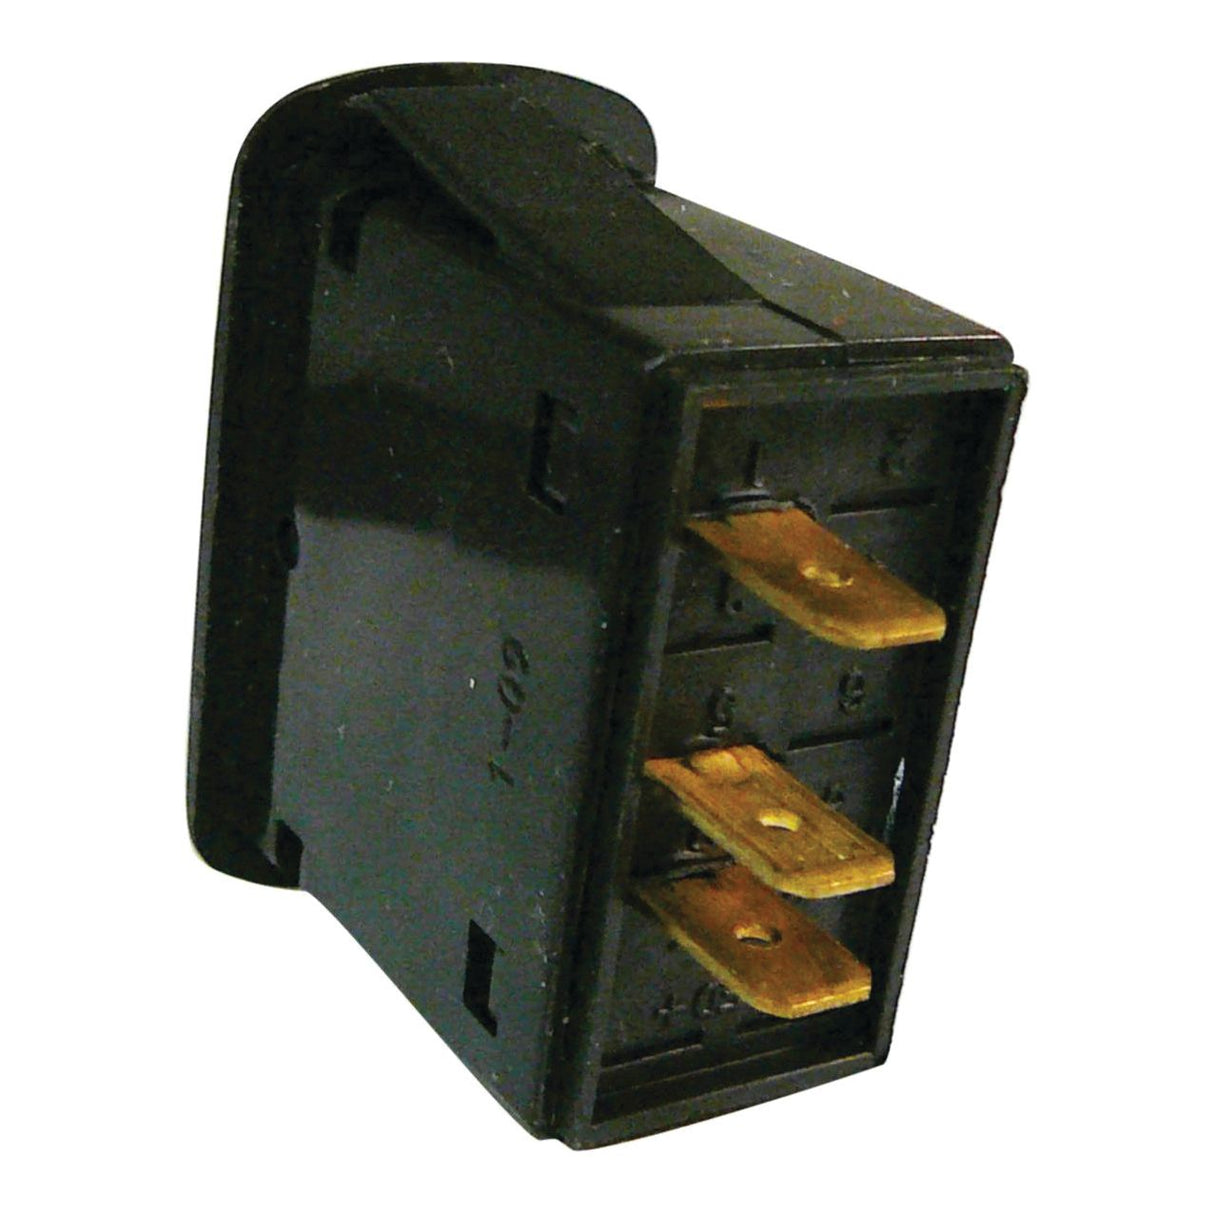 Indicator Switch
 - S.67124 - Massey Tractor Parts